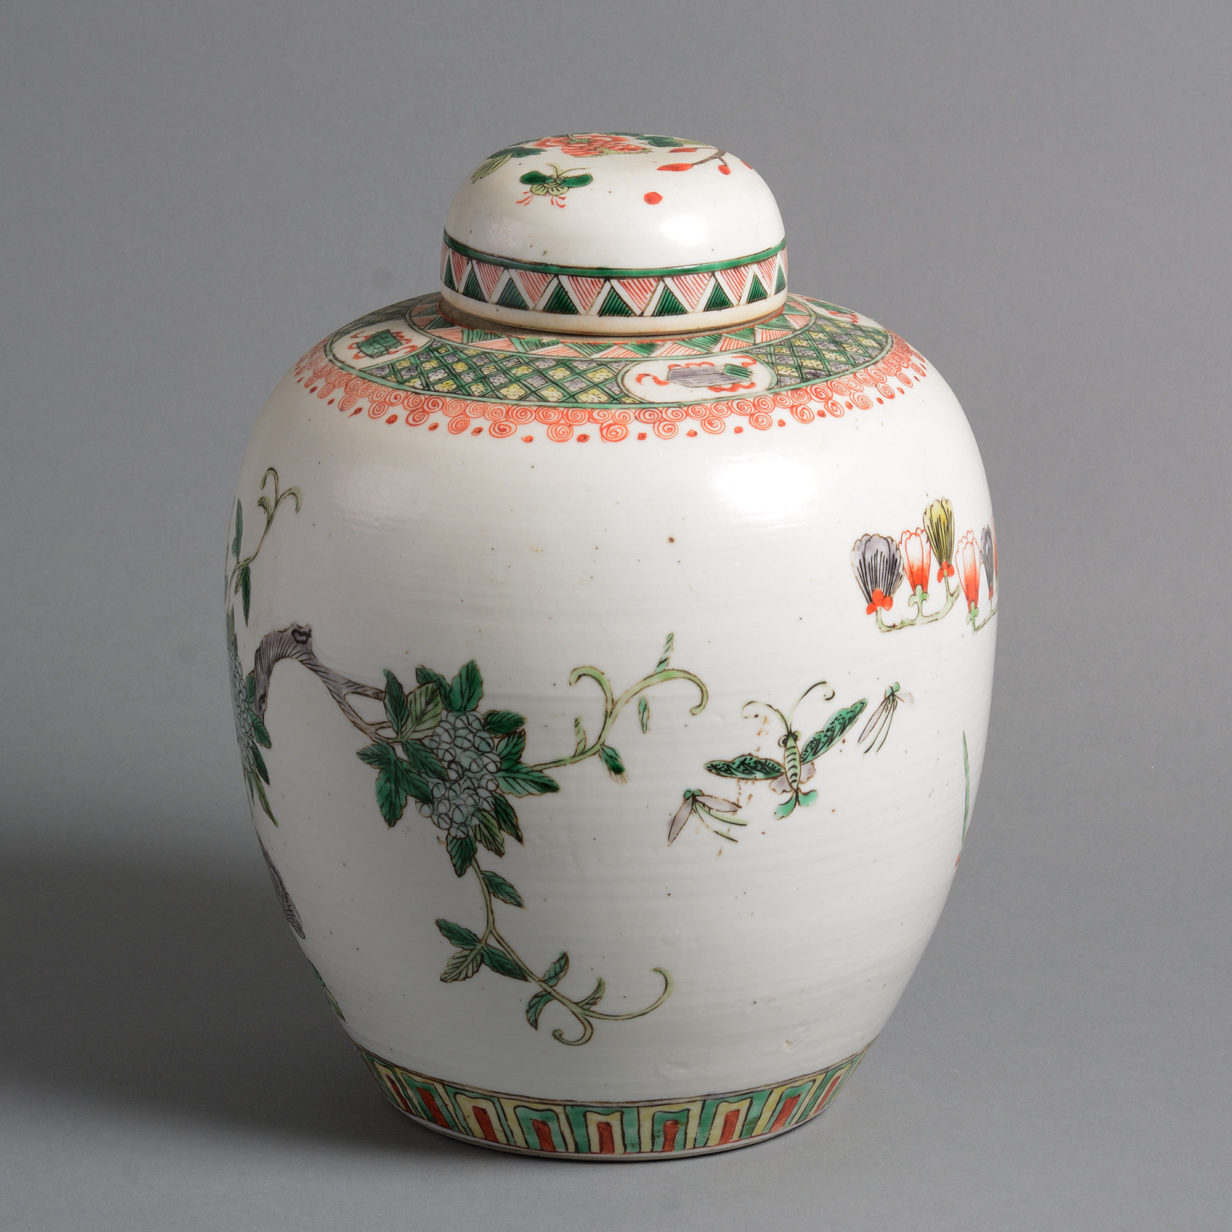 A 19th Century Qing Dynasty Famille Verte Jar and Cover